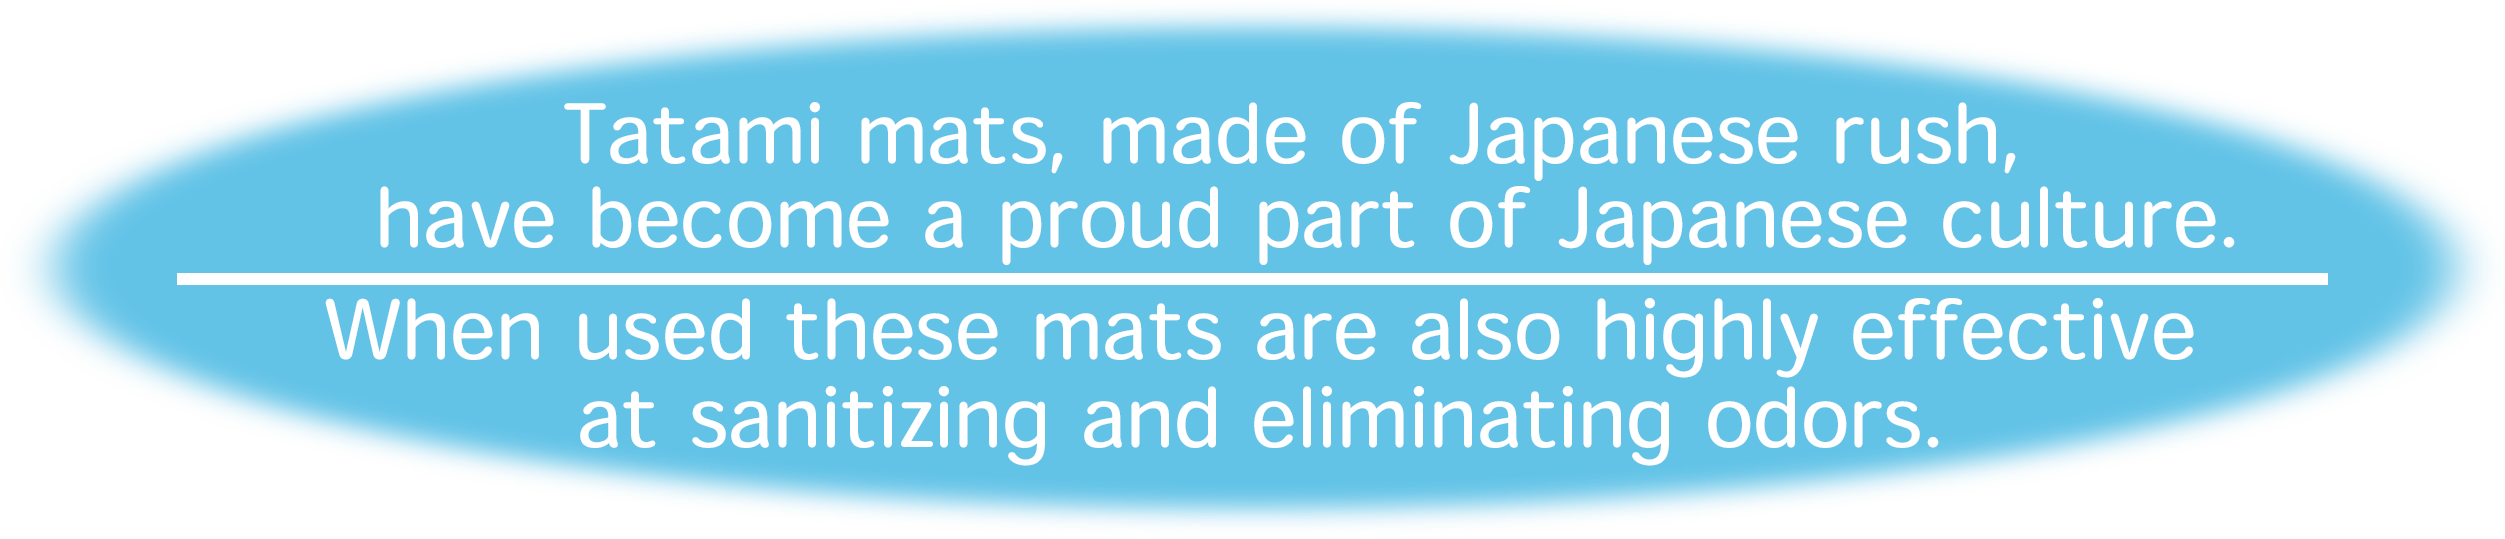 Tatami mats, made of Japanese rush, have become a proud part of Japanese culture. When used these mats are also highly effective in sanitizing and eliminating odors.